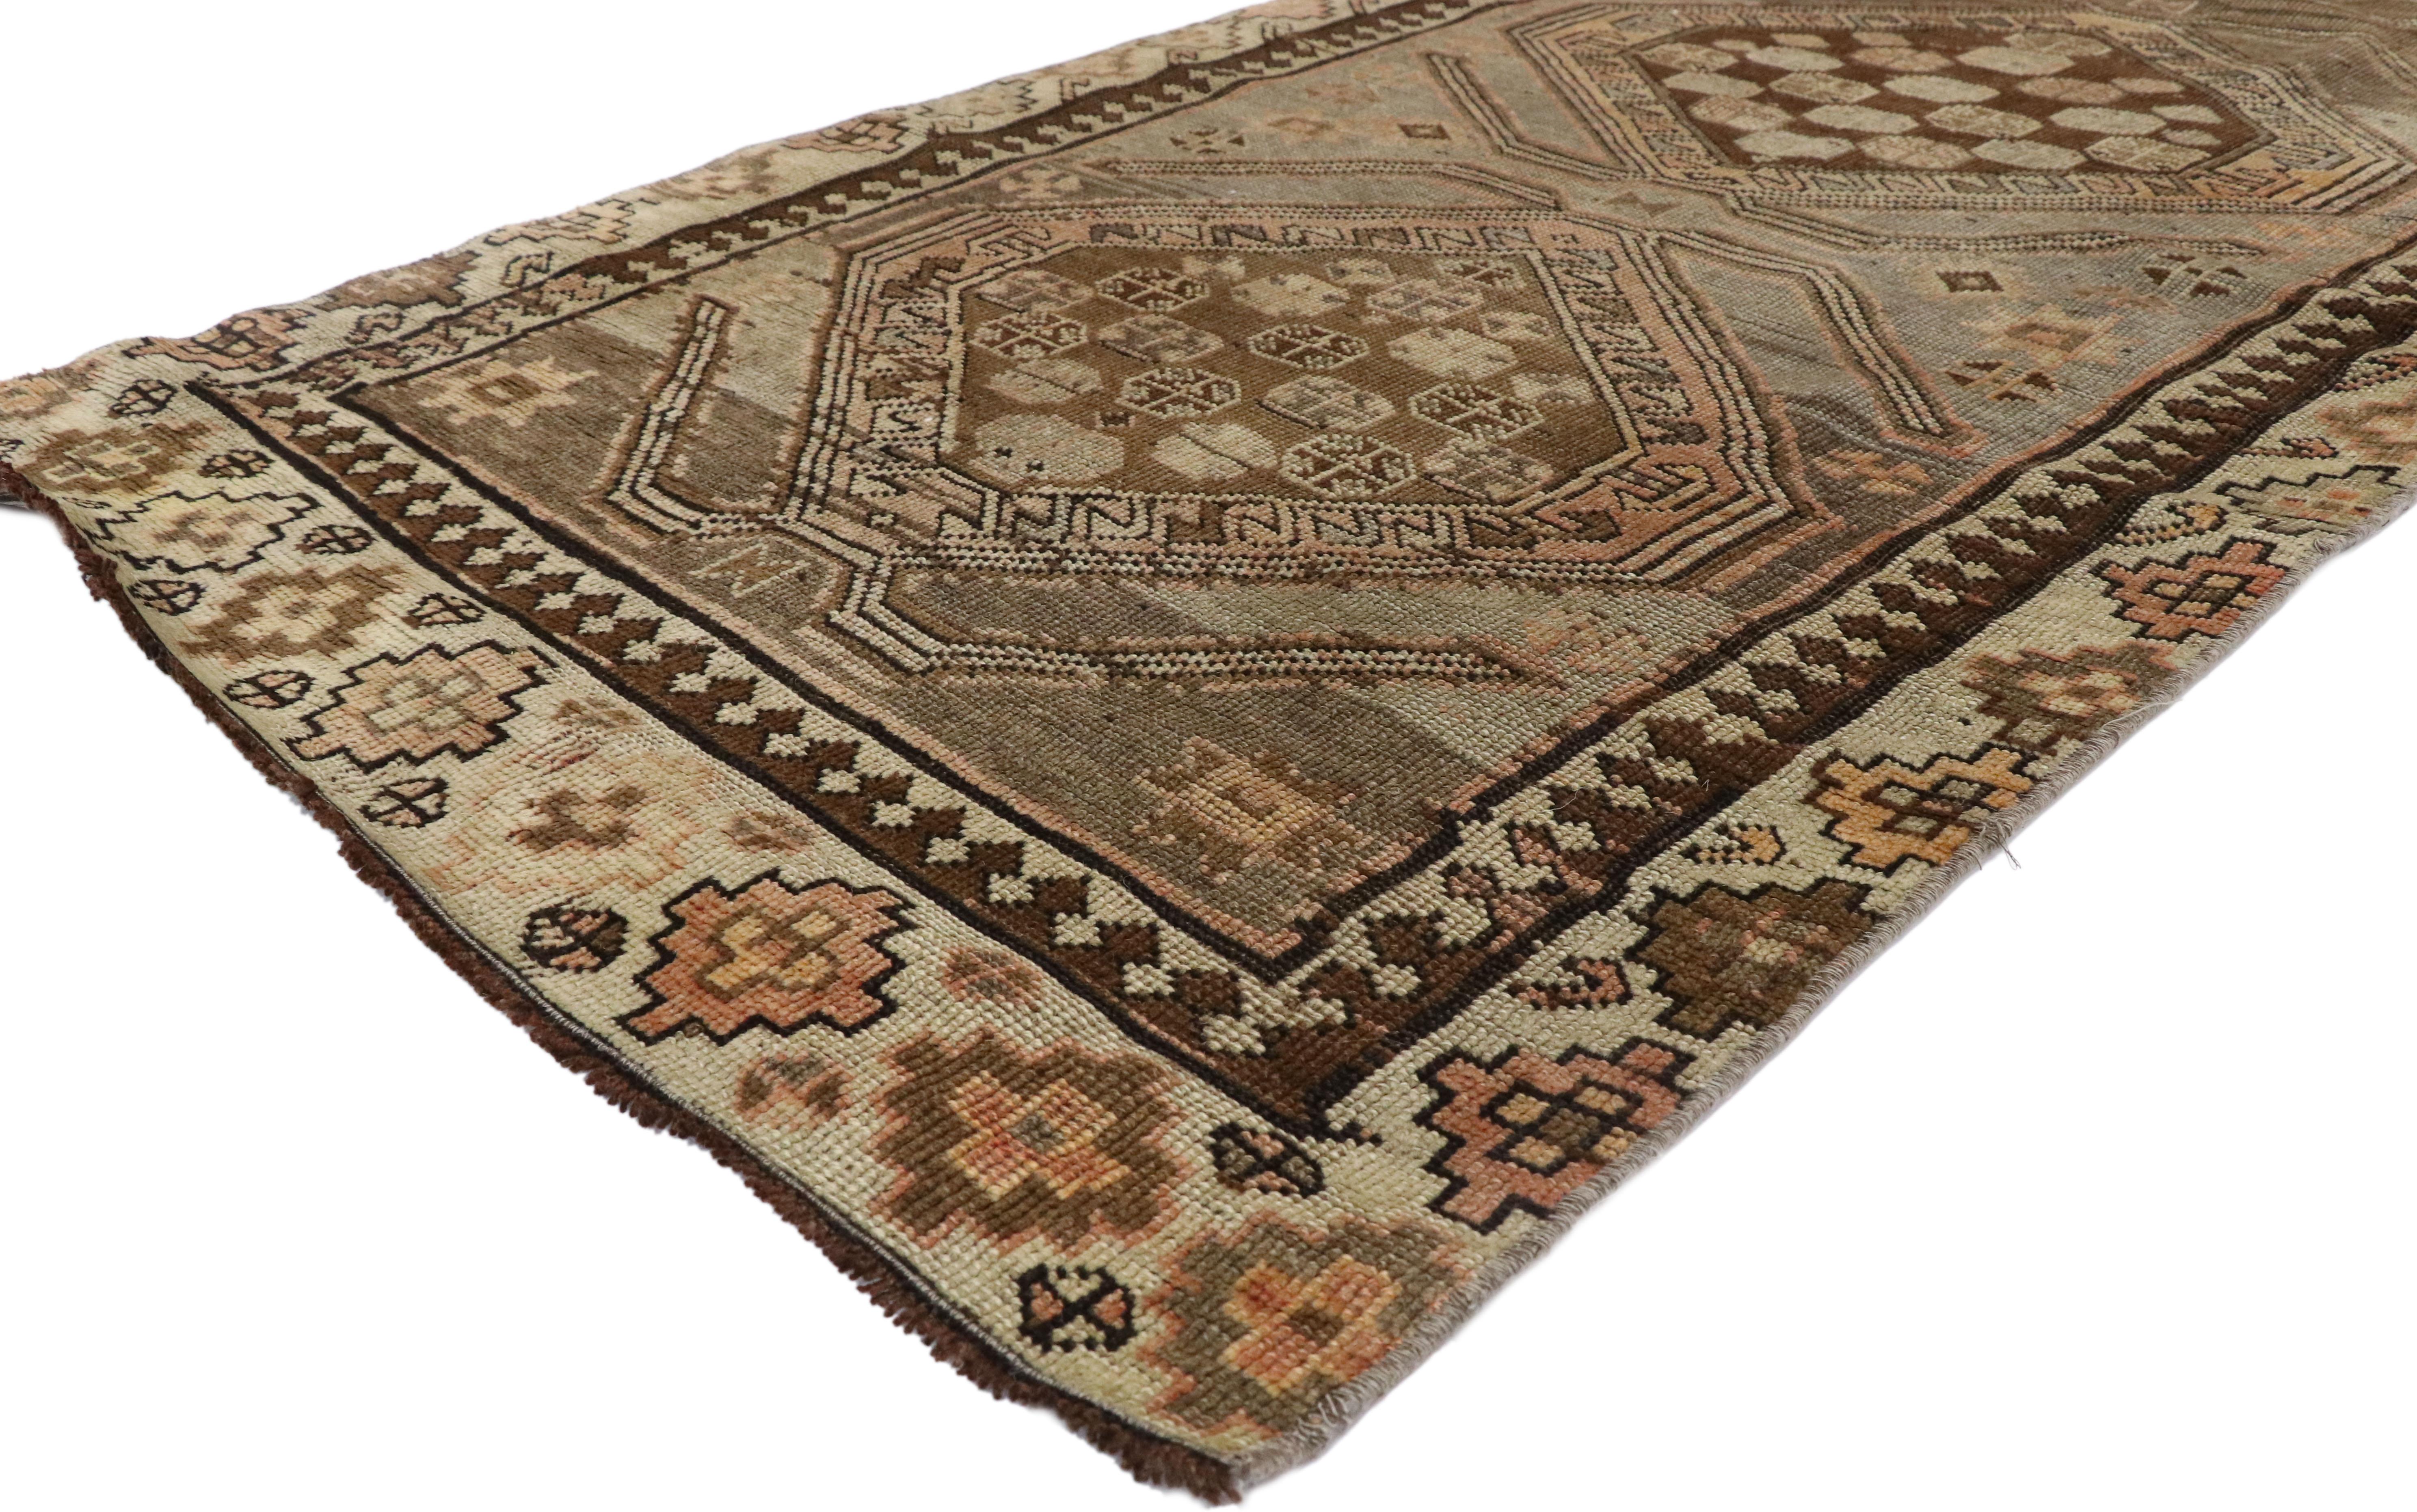 52056 Vintage Turkish Oushak Runner with Modern Shaker Style, Hallway Runner. Understated elegance meets soft, warm colors in this hand-knotted wool vintage Turkish Oushak runner. The Oushak hallway runner features a beautiful display of five